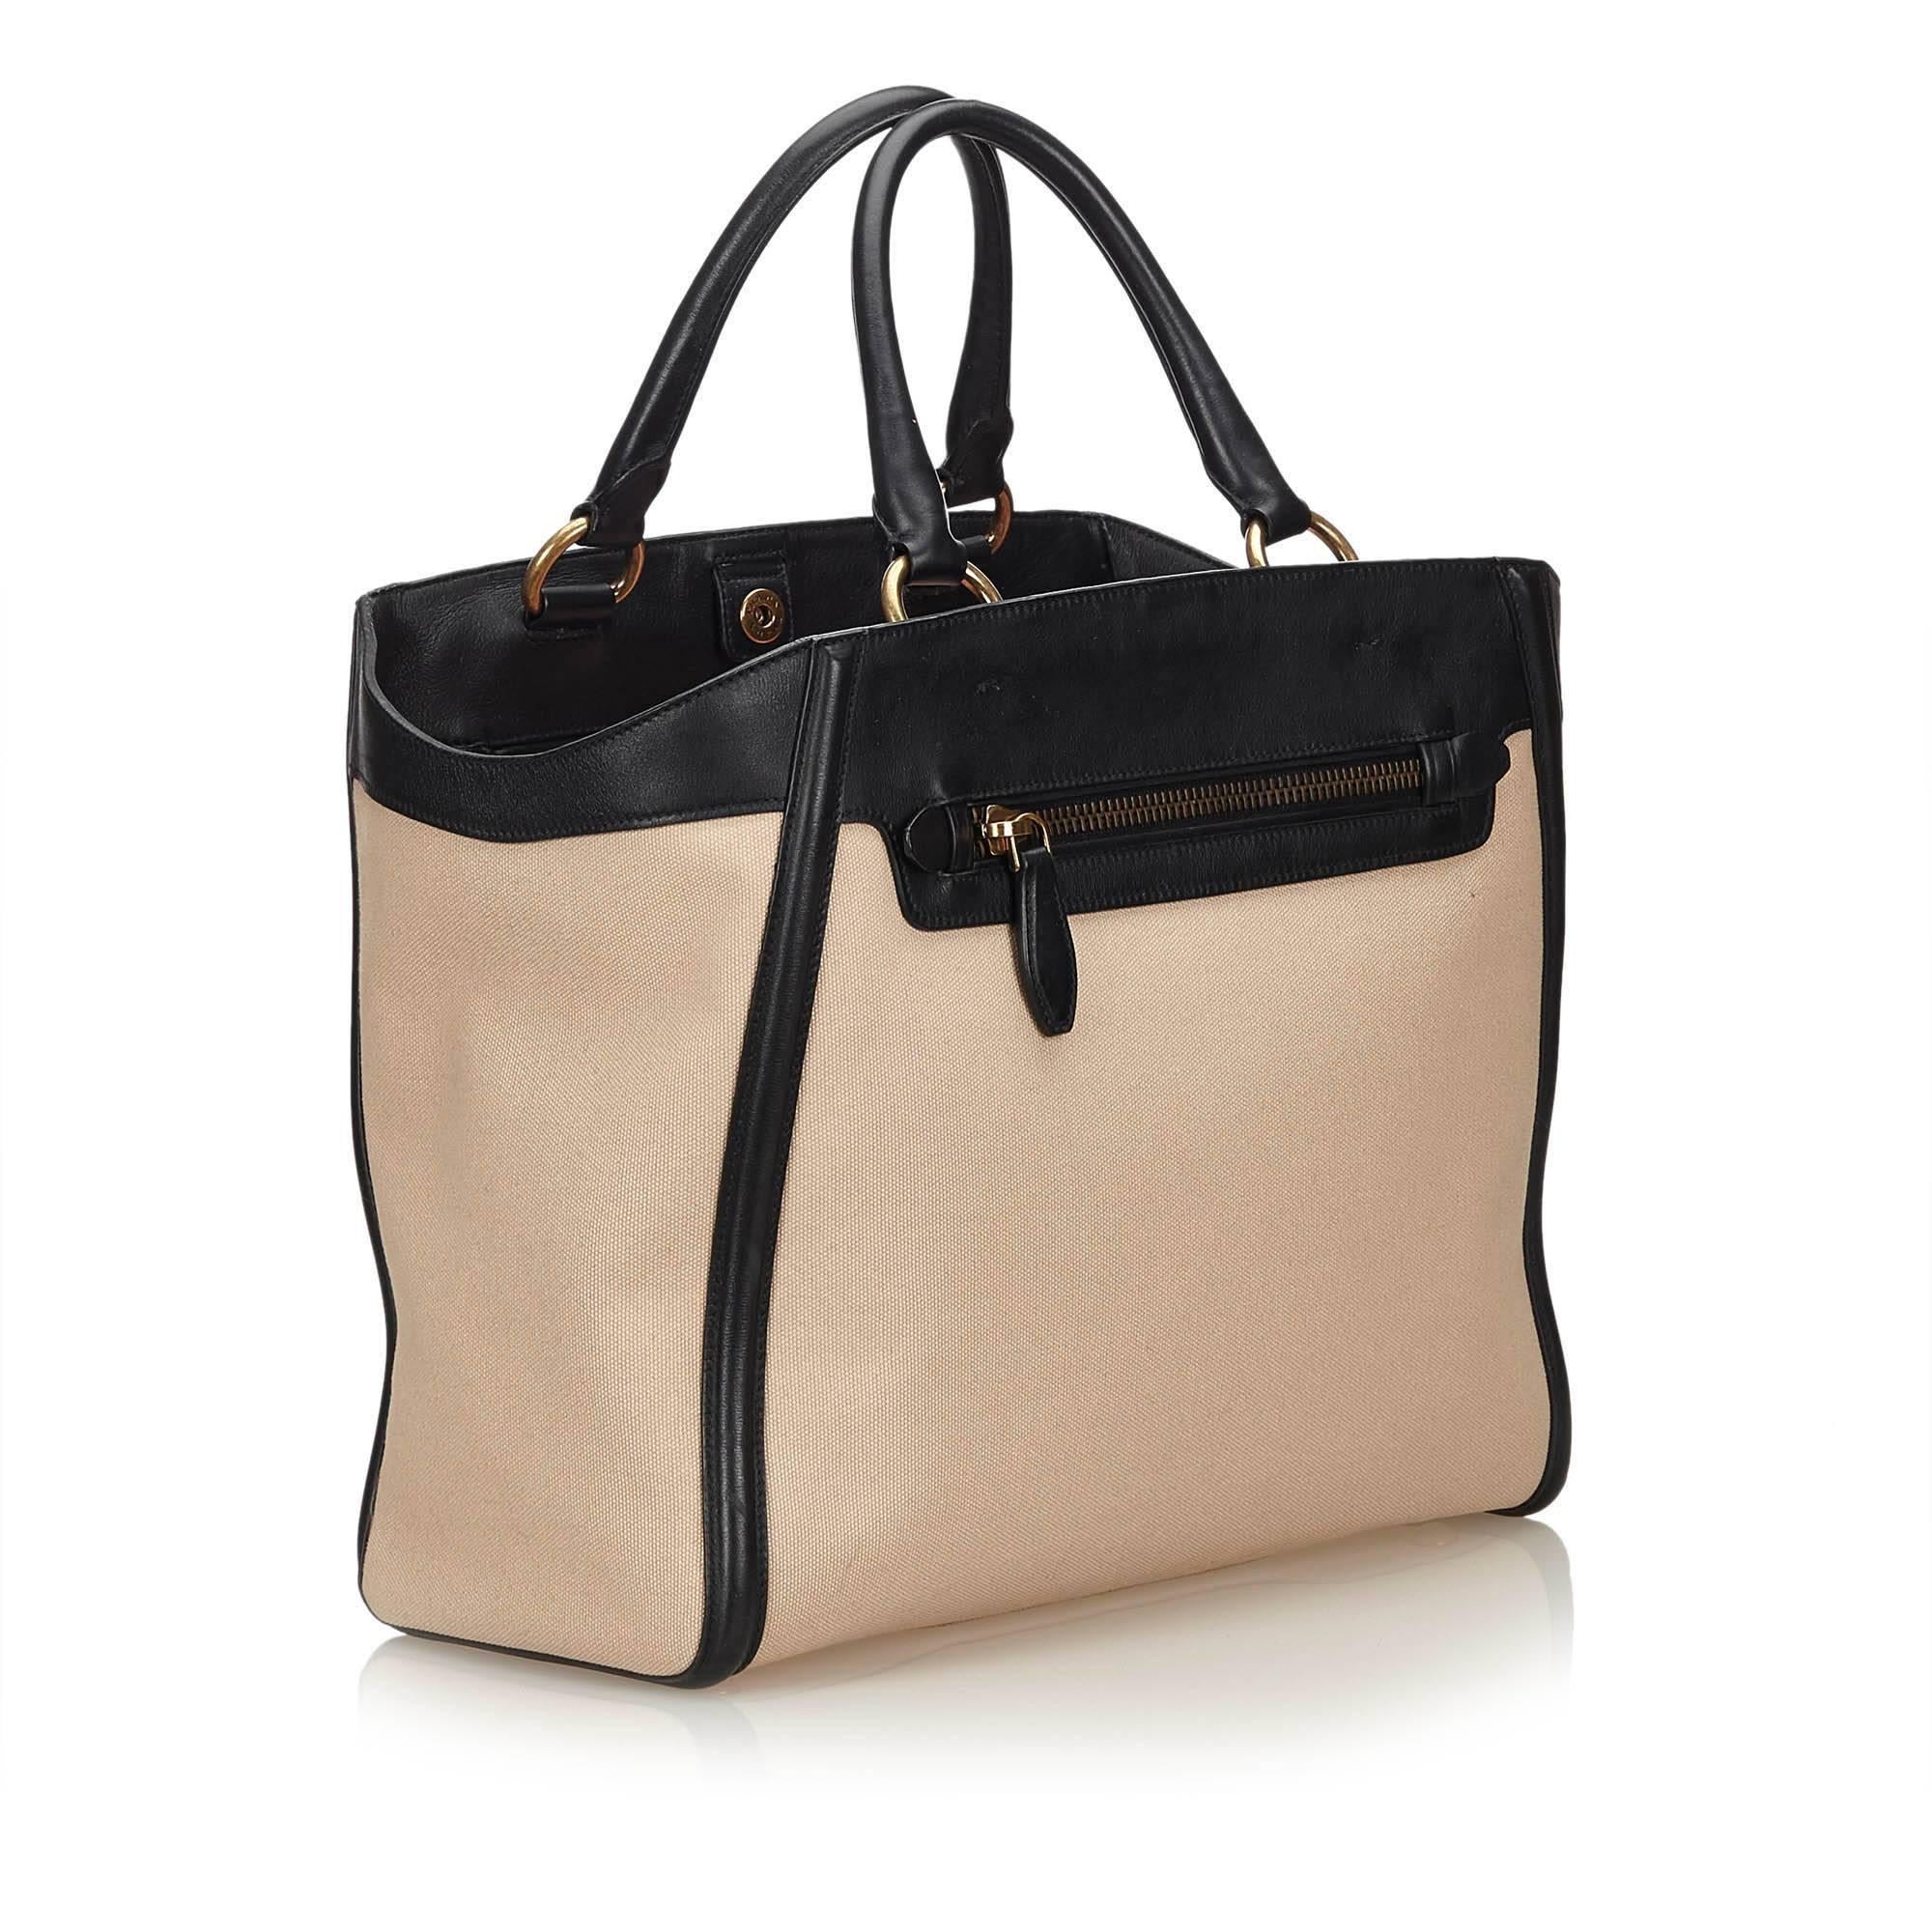 The tote bag features a canvas body with leather top panel and trim, rolled leather handles, open top with snap button closure, exterior zip pocket and interior zip, flap, and slip pockets. 

It carries an AB condition rating.

Dimensions: 
Length